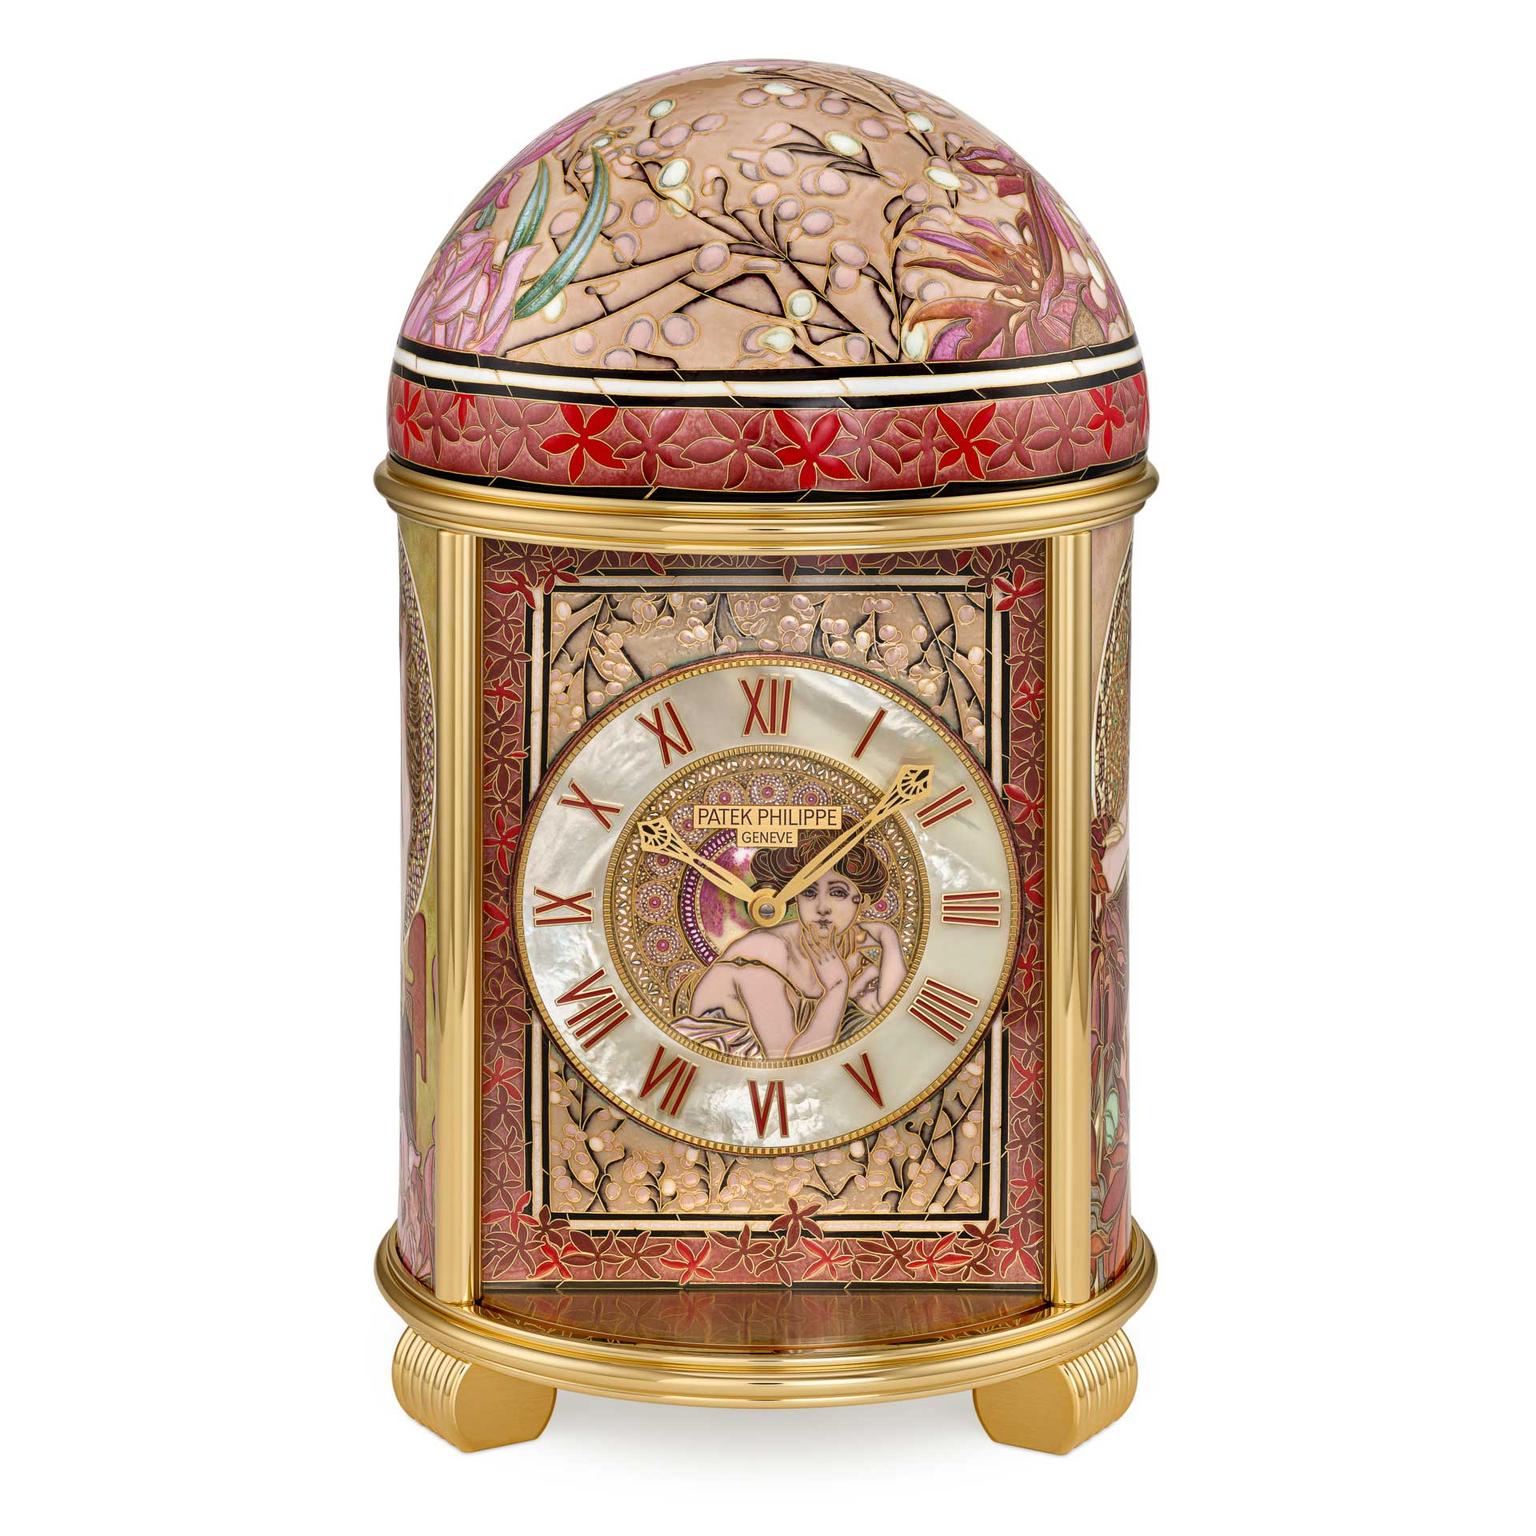 Patek Philippe Pond with White Water Lilies dome clock 